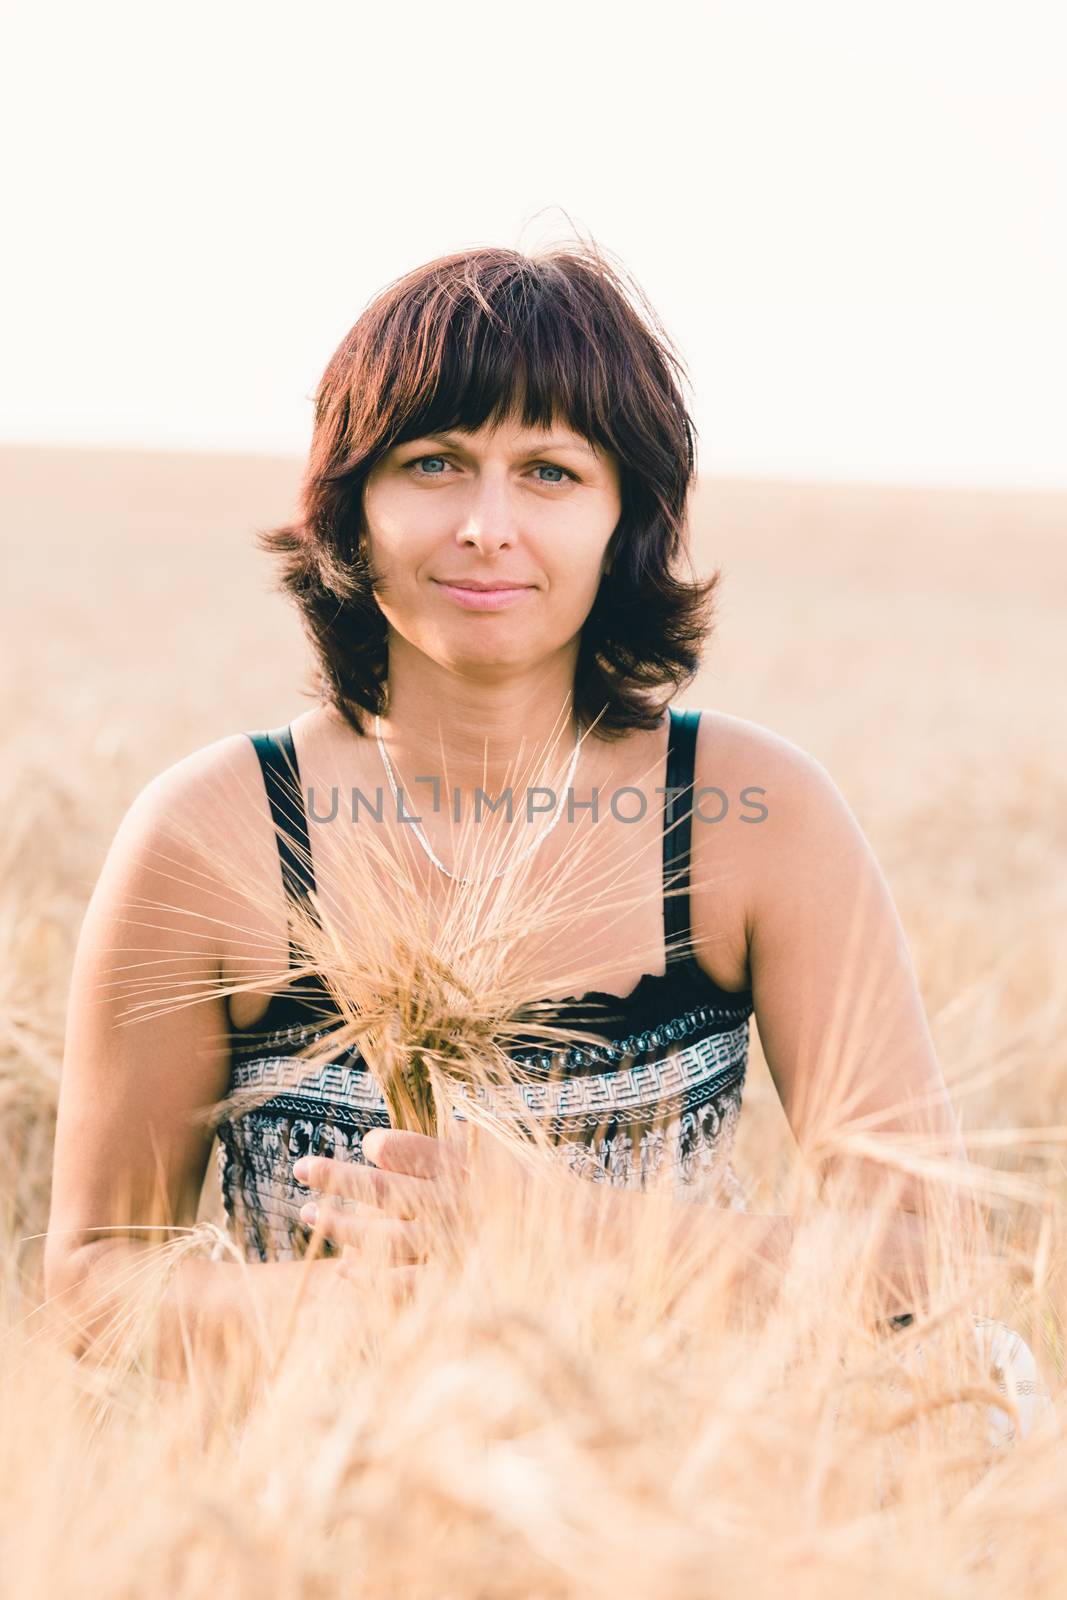 Middle aged beauty woman with summer dress and no makeup relaxing in countryside tearing into bouquet of golden barley with her hand, summer concept